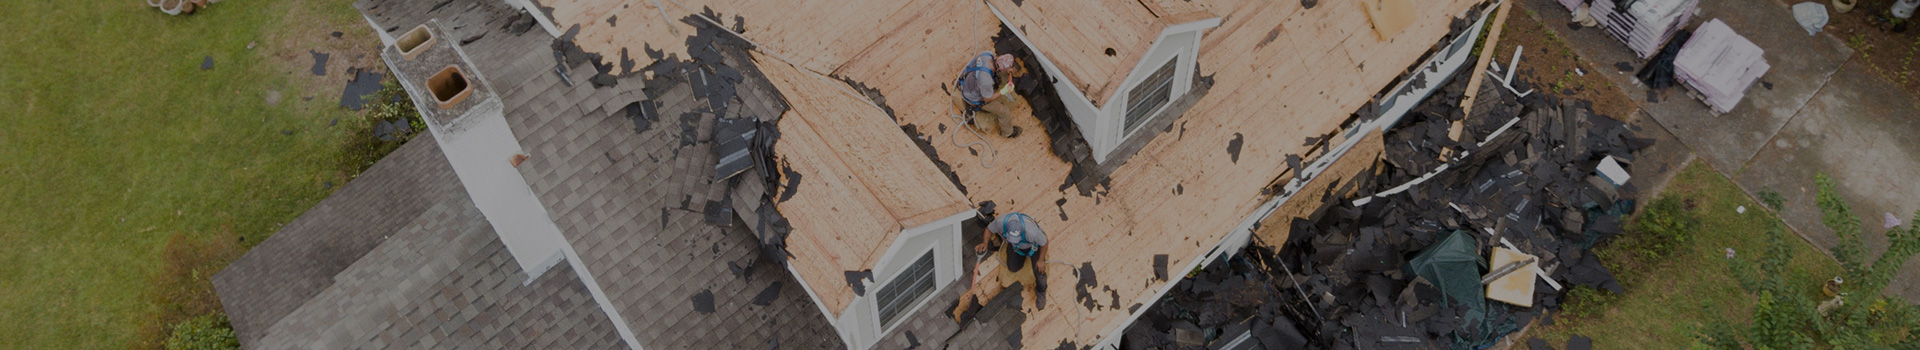 Workers Removing Shingles | Roof Inspection